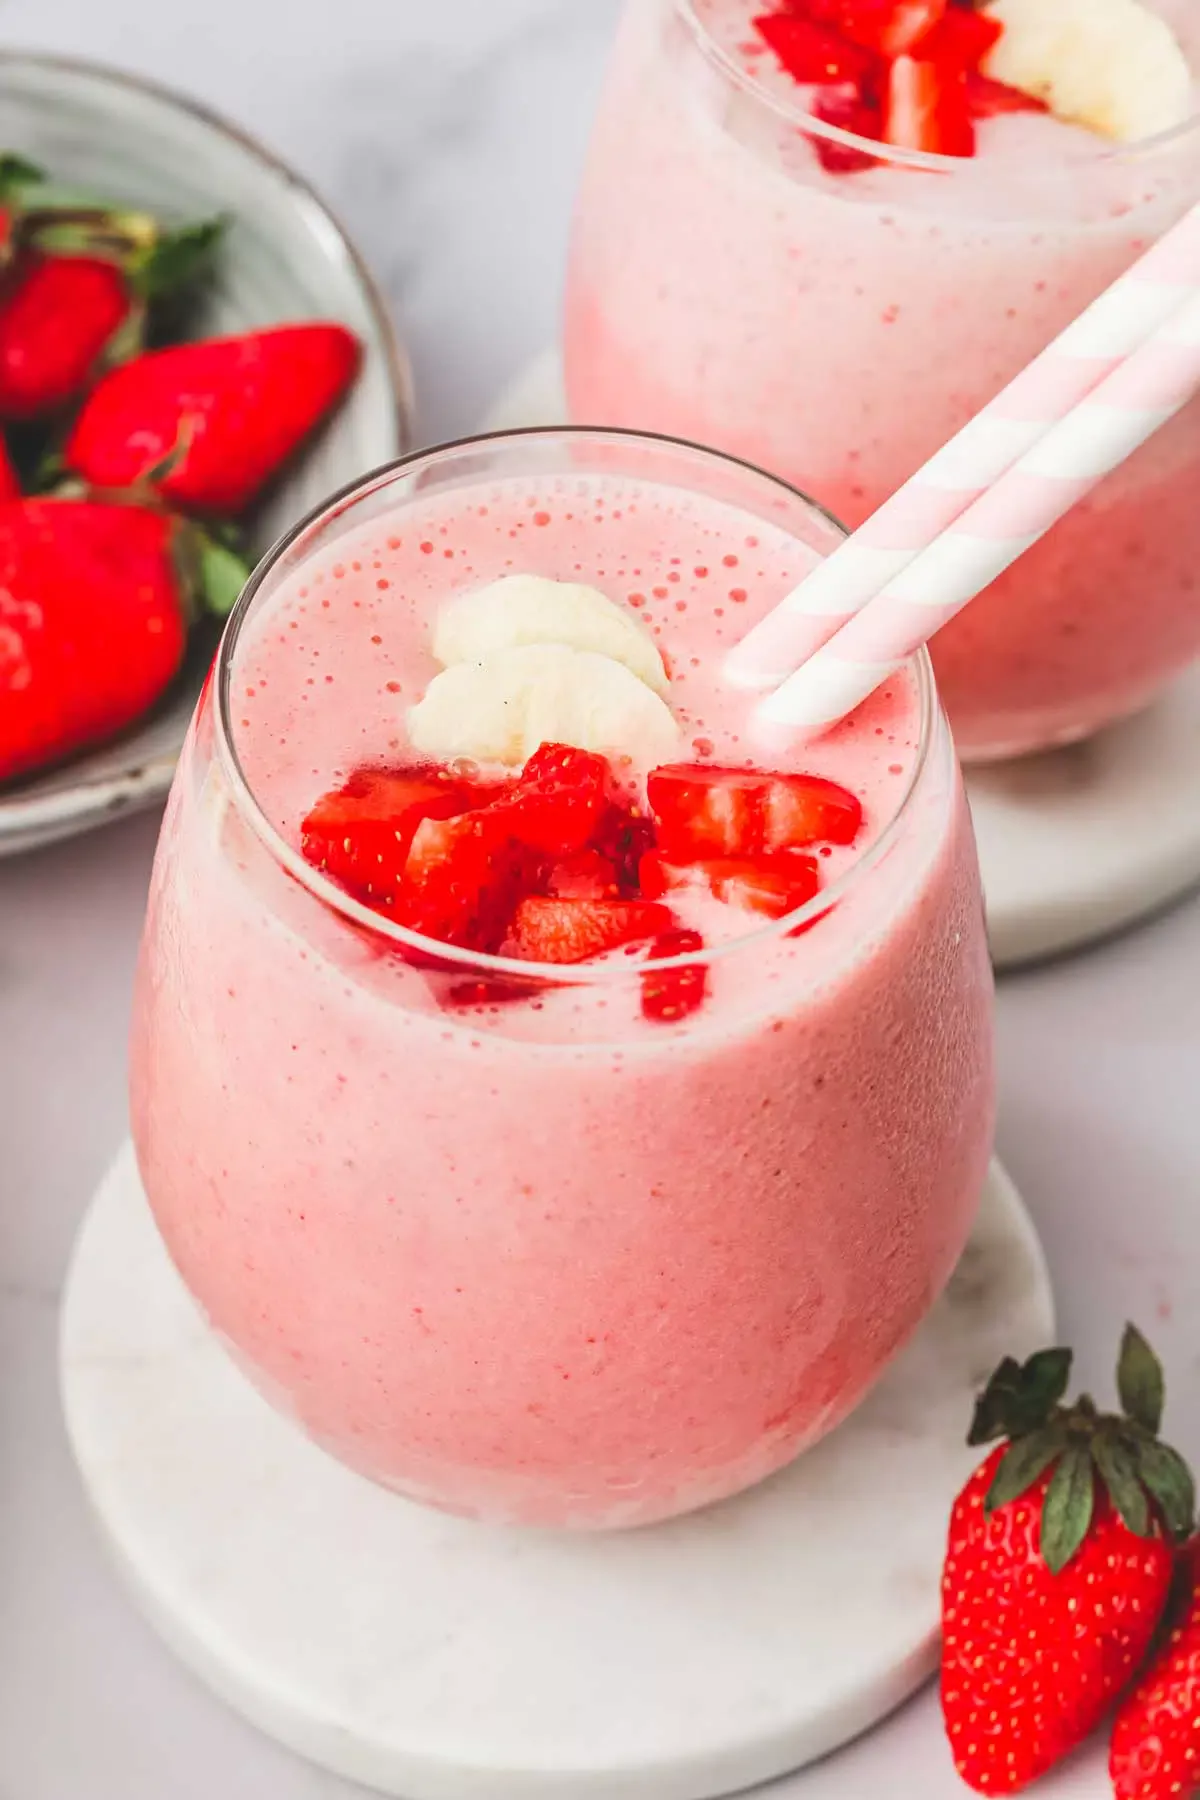 Best Strawberry Banana Smoothie - 3 ingredients - Ready in 5 min